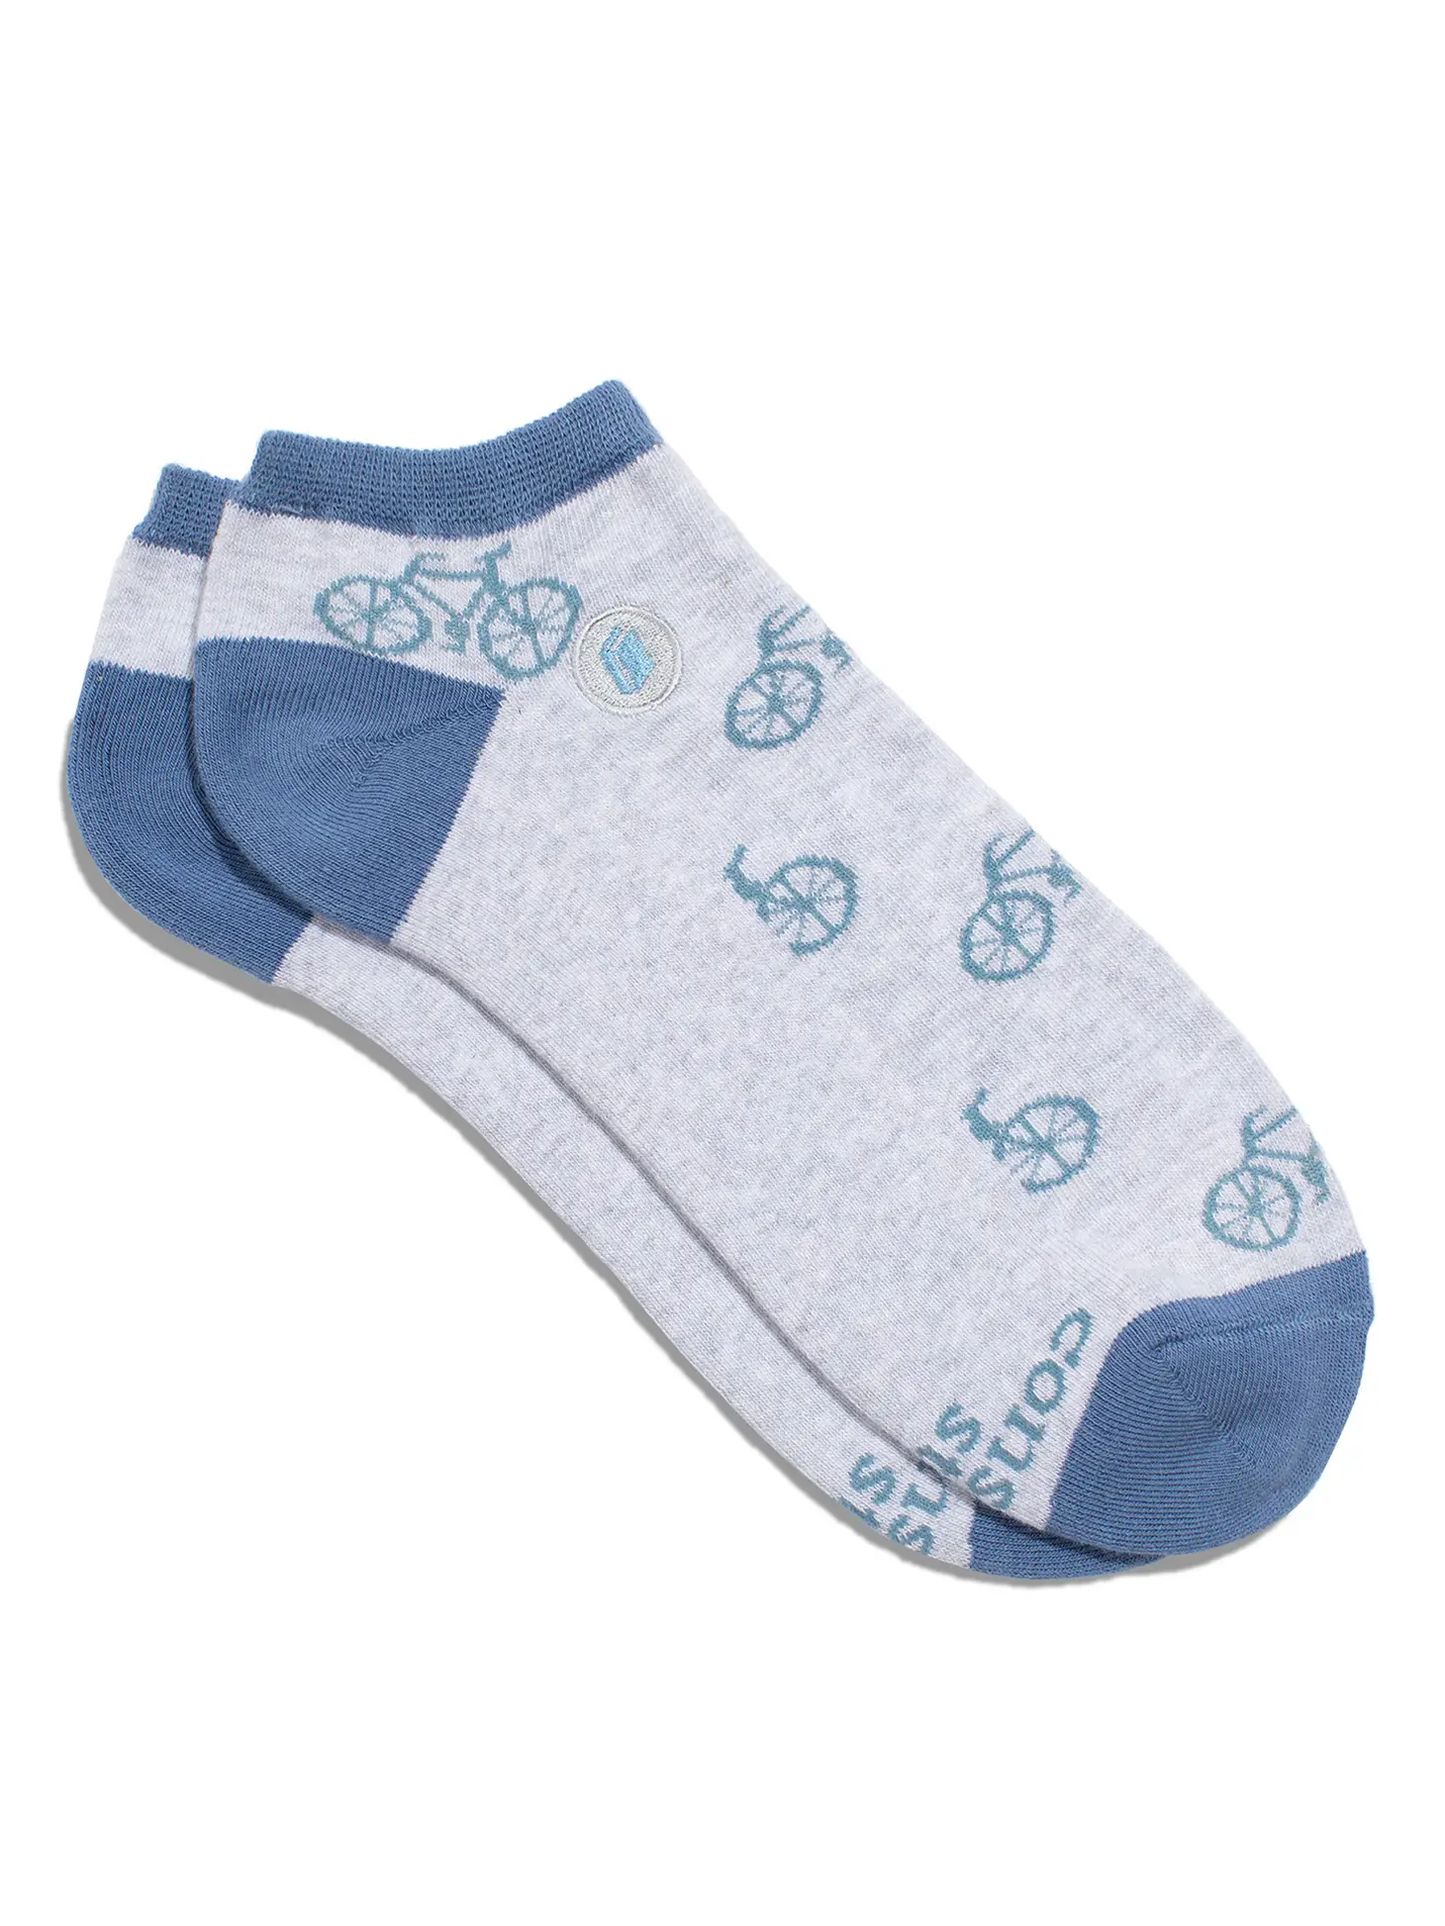 Ankle Socks That Give Books - Bikes